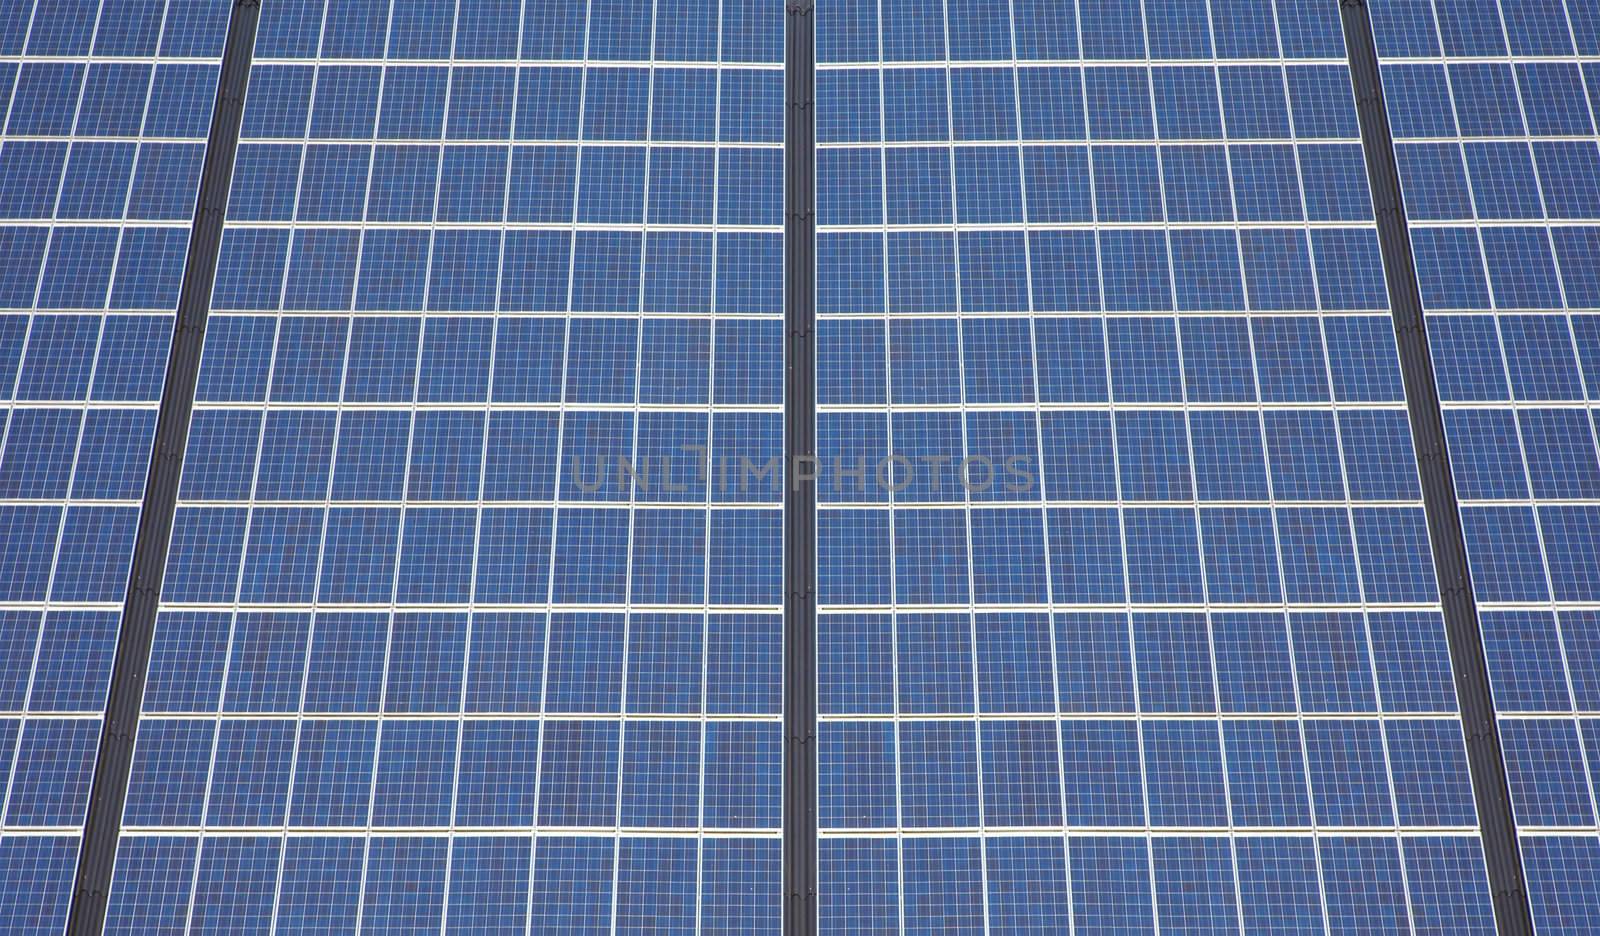 A photography of a solar panels texture